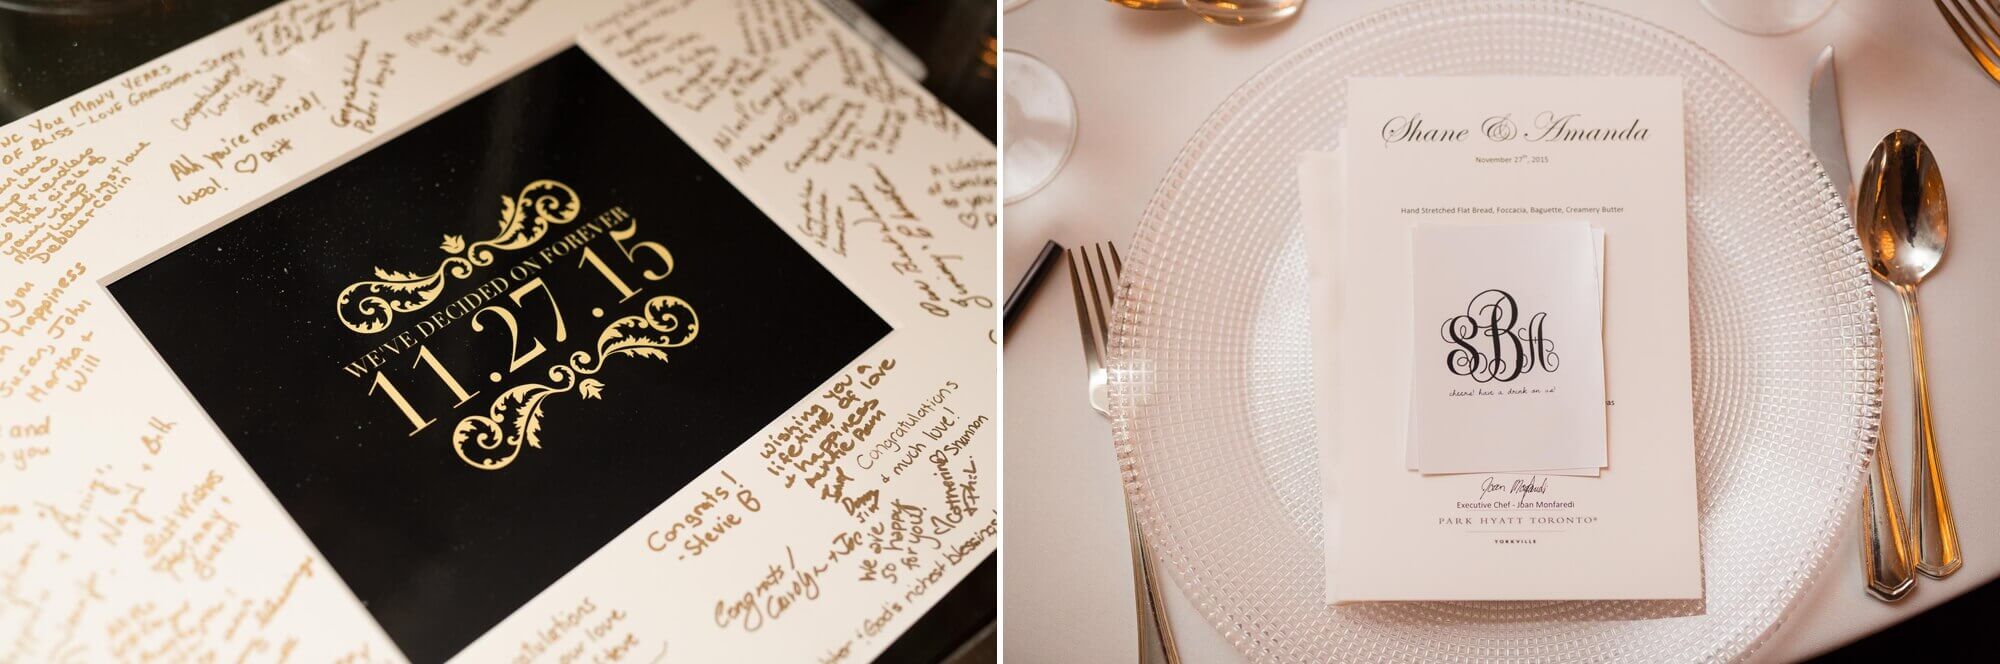 Details of the signatures by the bride and grooms guests at the Fairmont Royal York, Toronto 